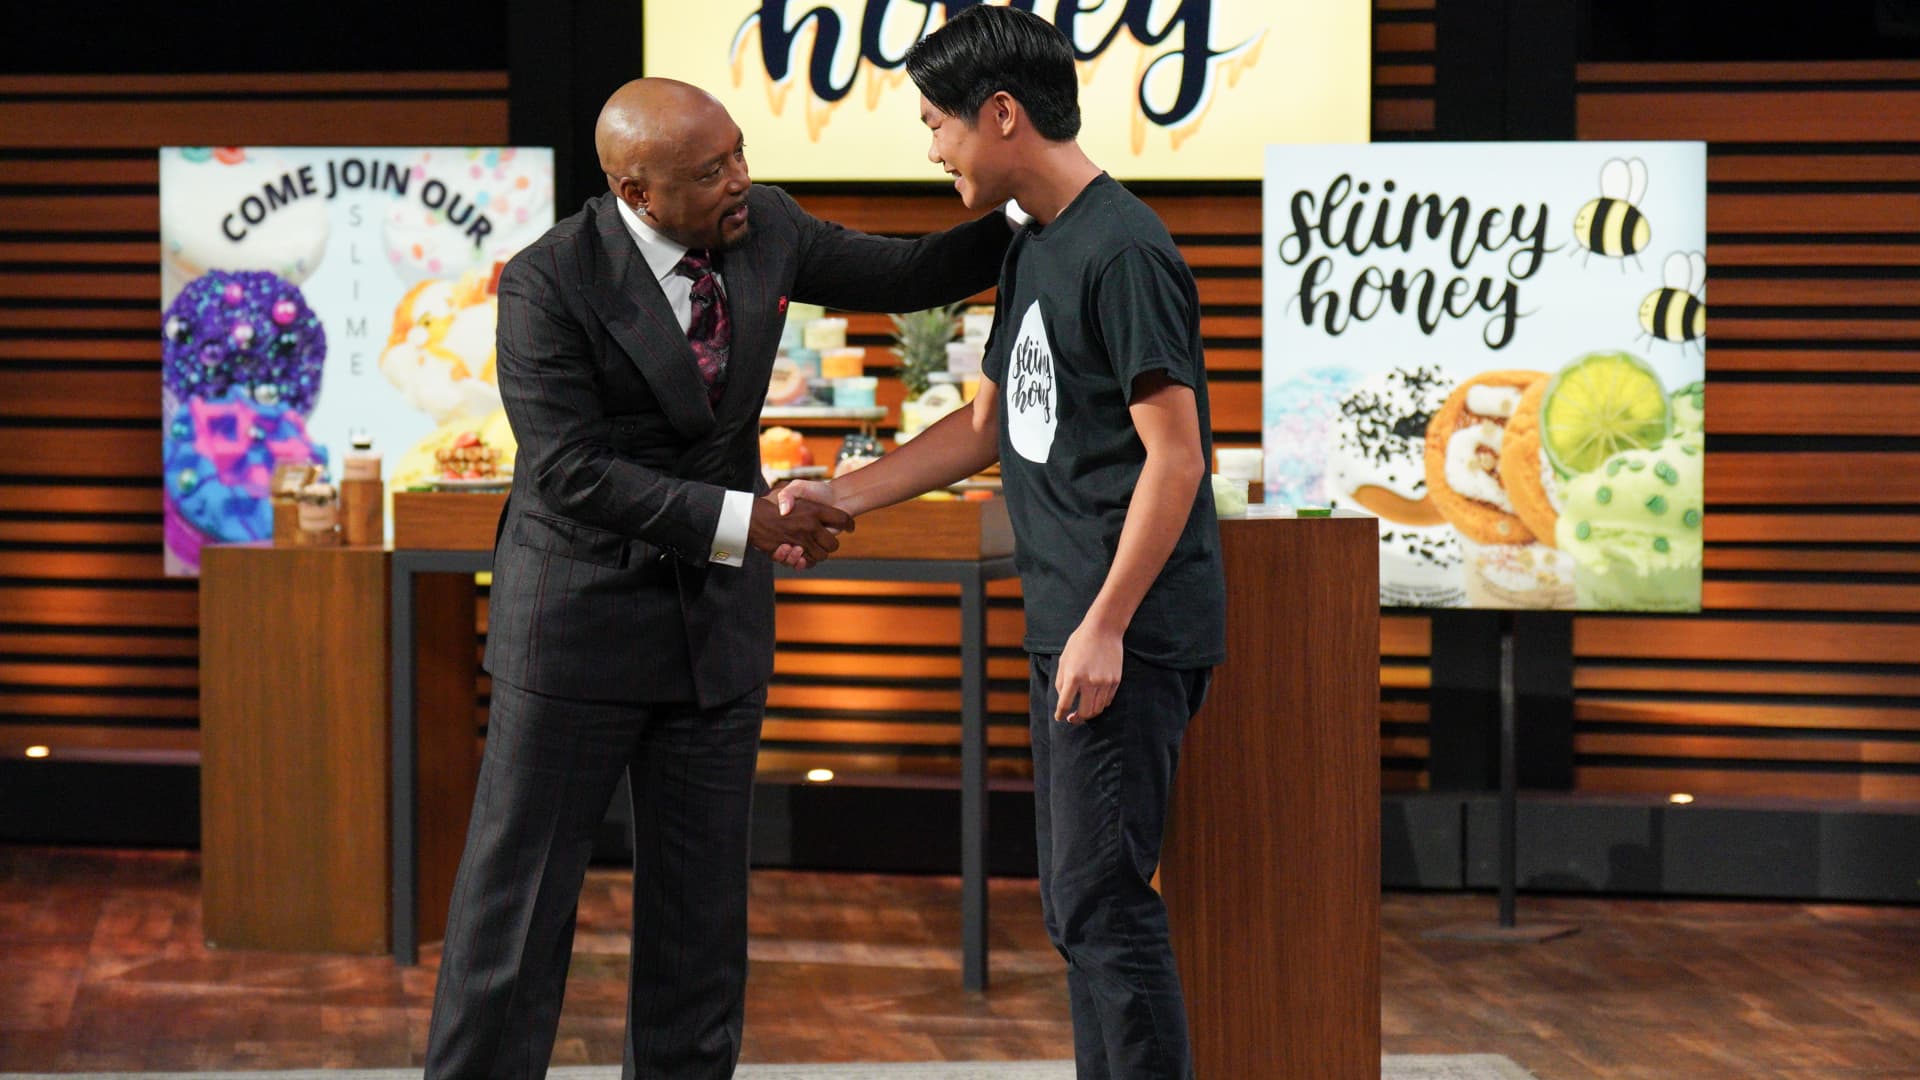 17-year-old 'Shark Tank' contestant made slime in his garage, sold it to his friends, brought in $1 million in just 3 years